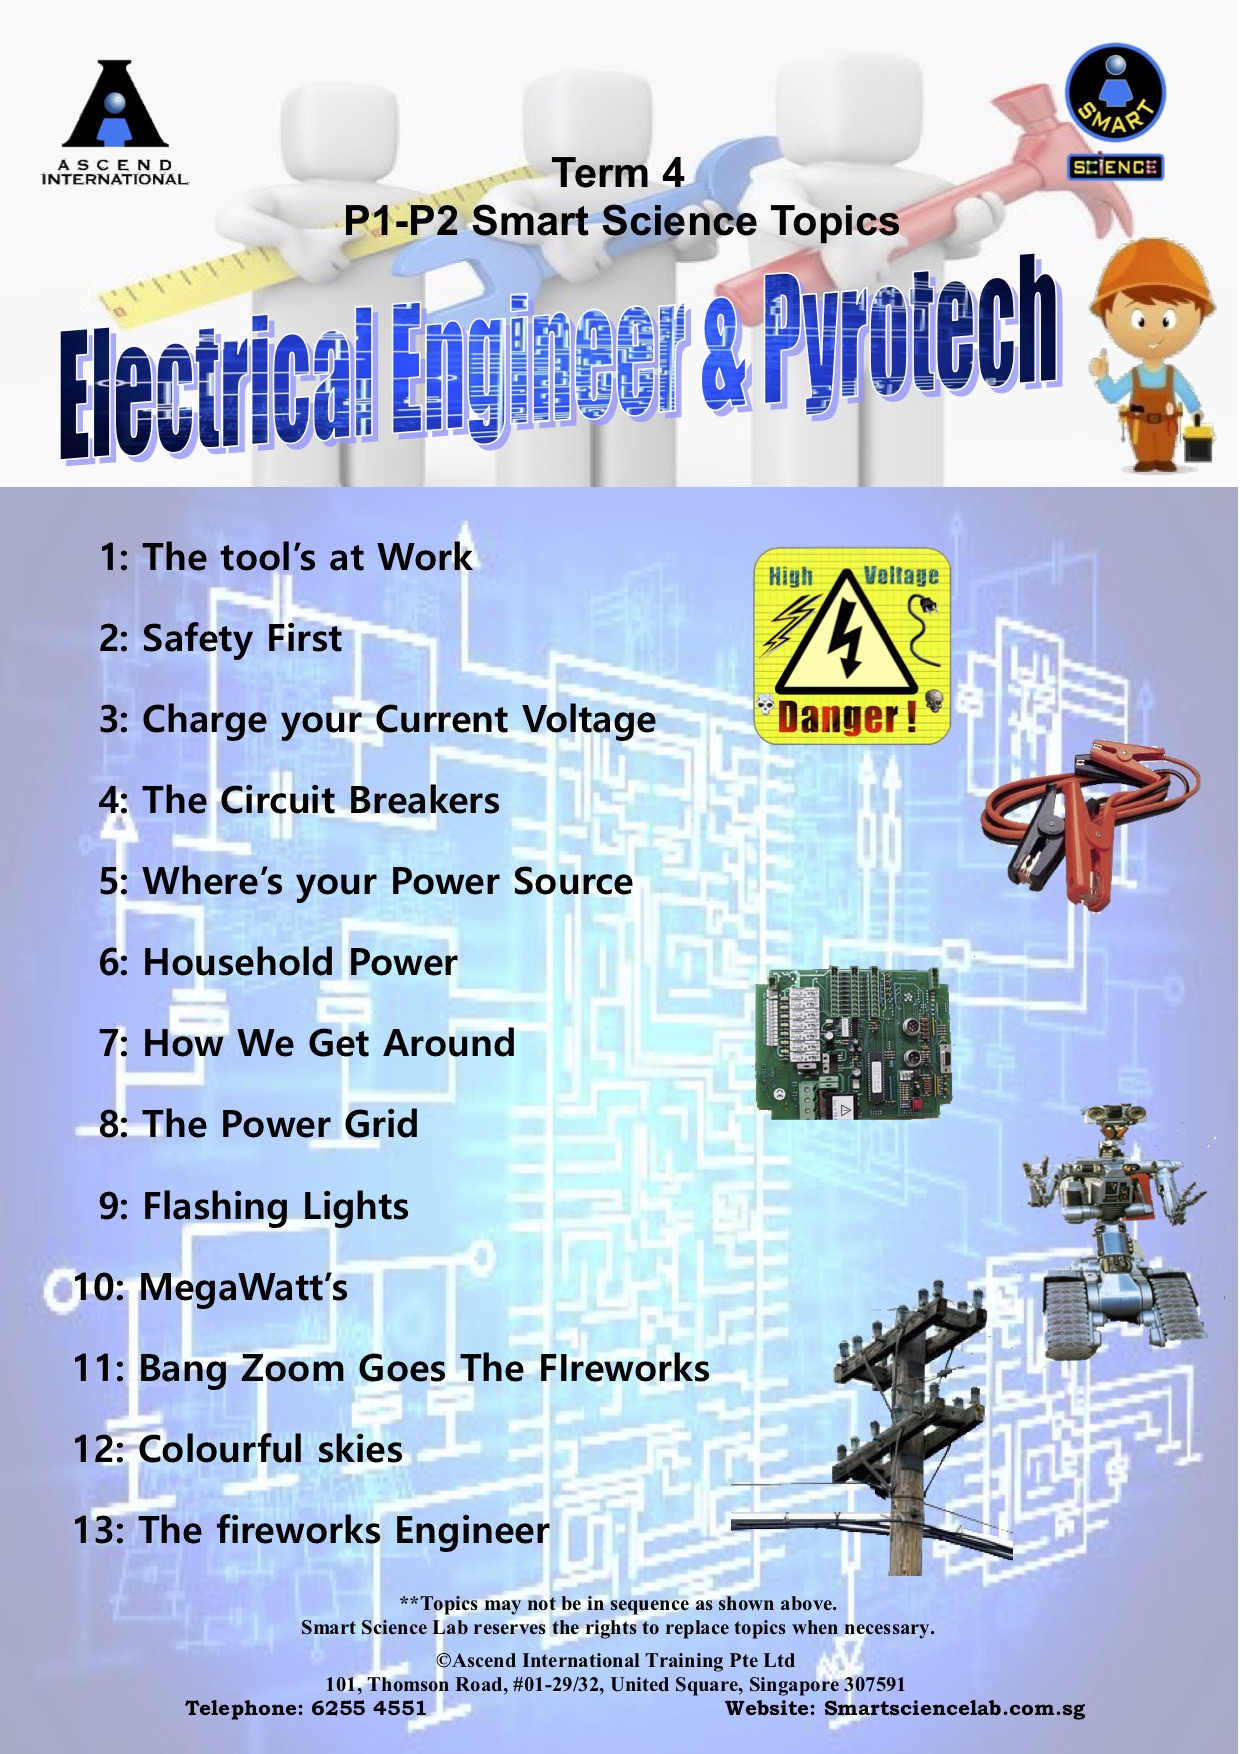 Term 4 Electrical Engineer _ Pyrotech Outline P1-P2.jpg